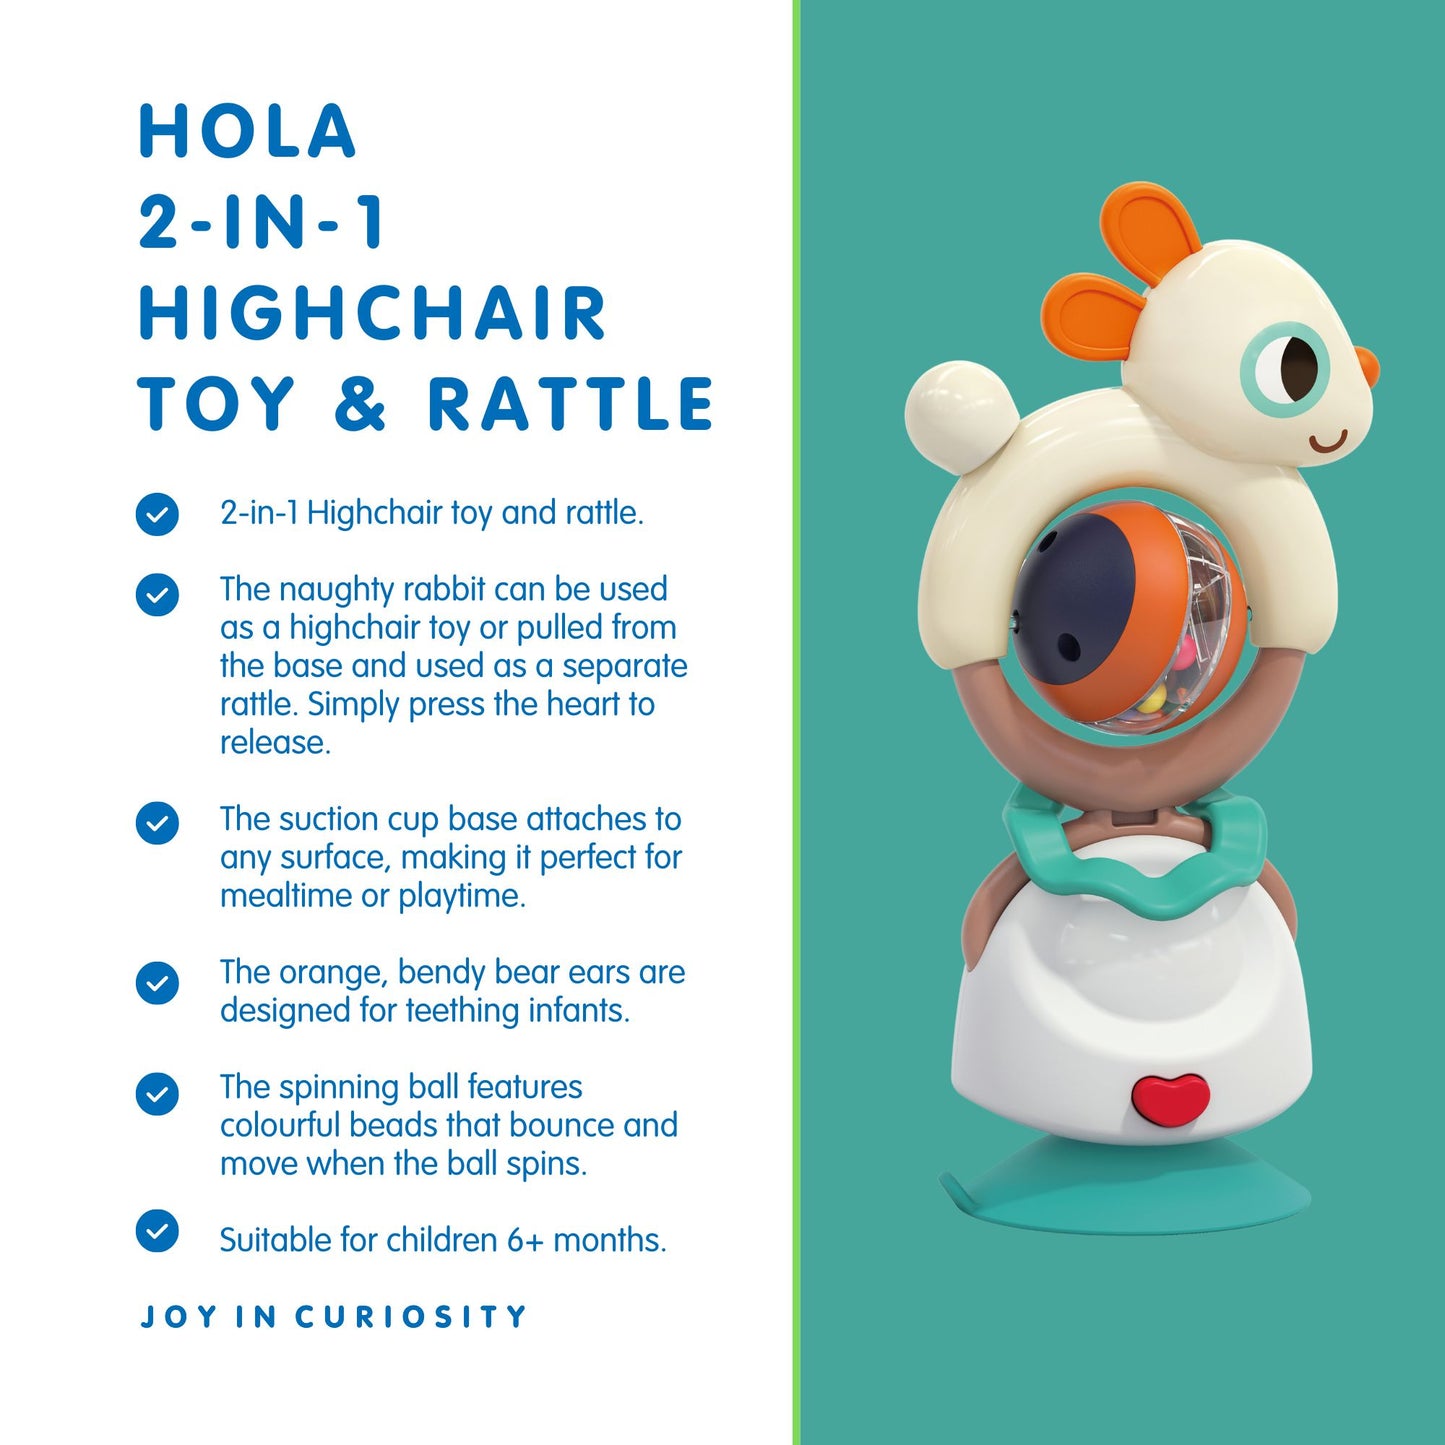 Hola 2-in-1 Highchair Toy – Naughty Rabbit